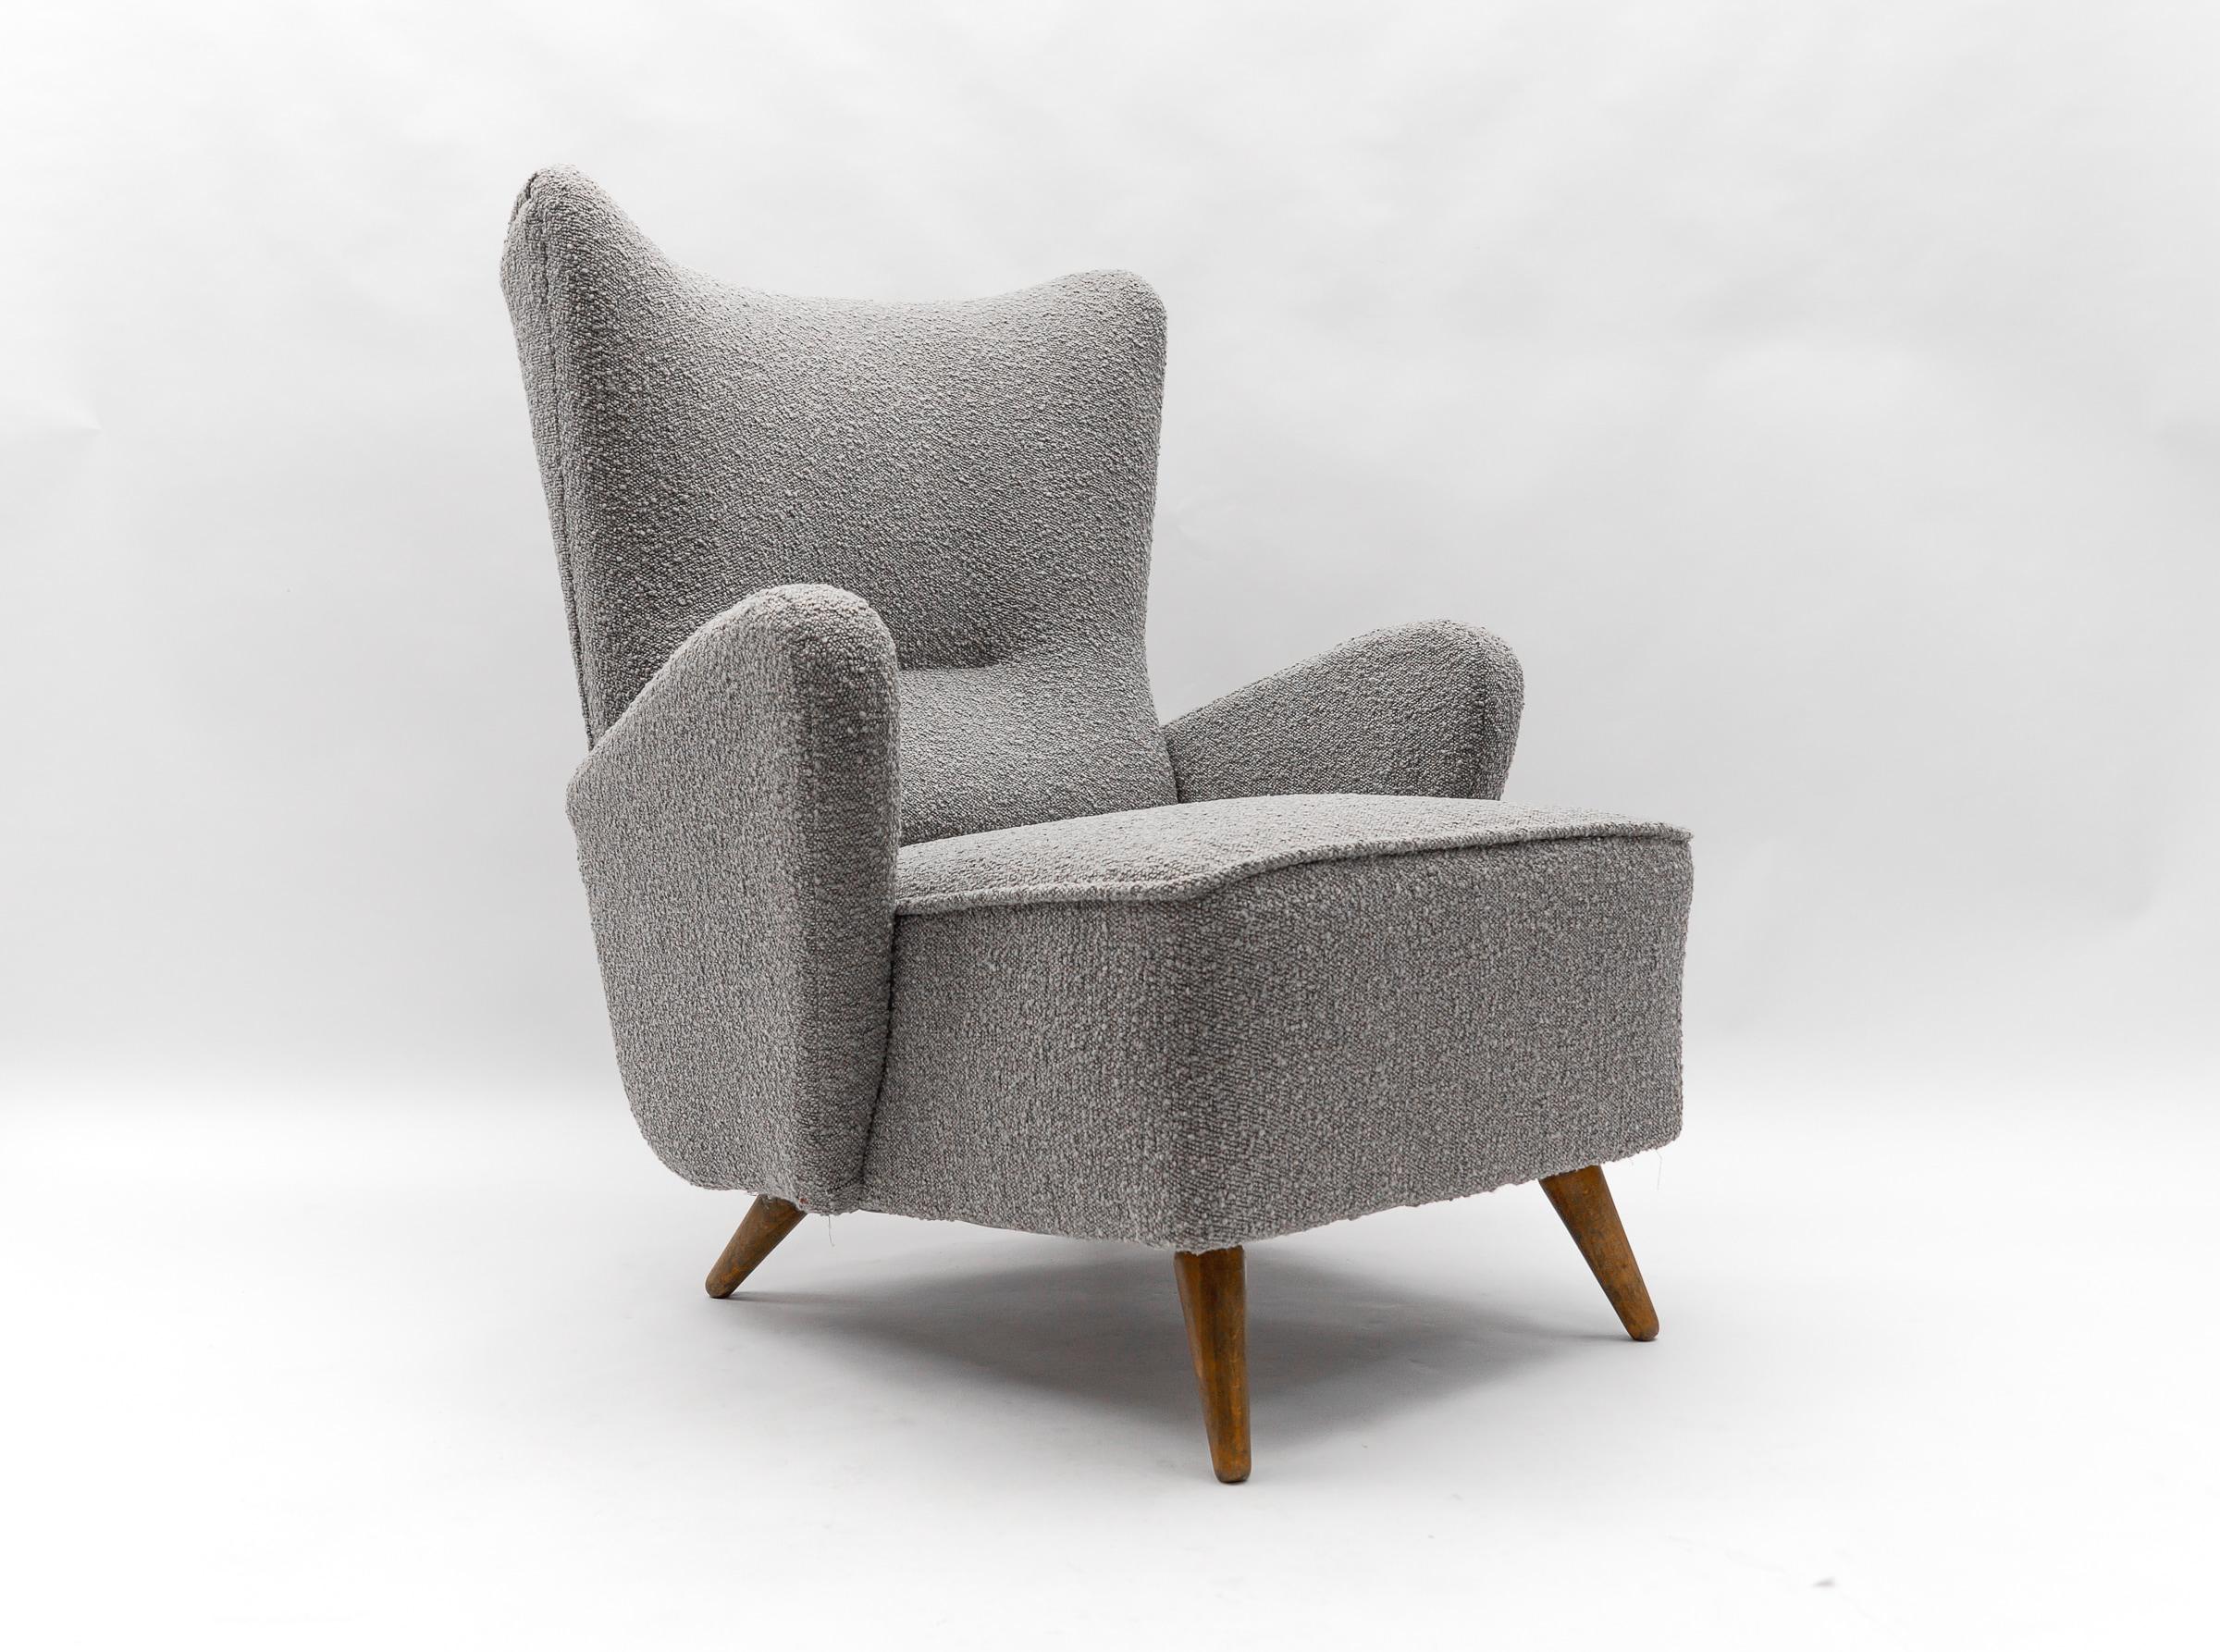 Italian Large Grey Boucle Fabric Wingback Armchair, Italy, 1950s For Sale